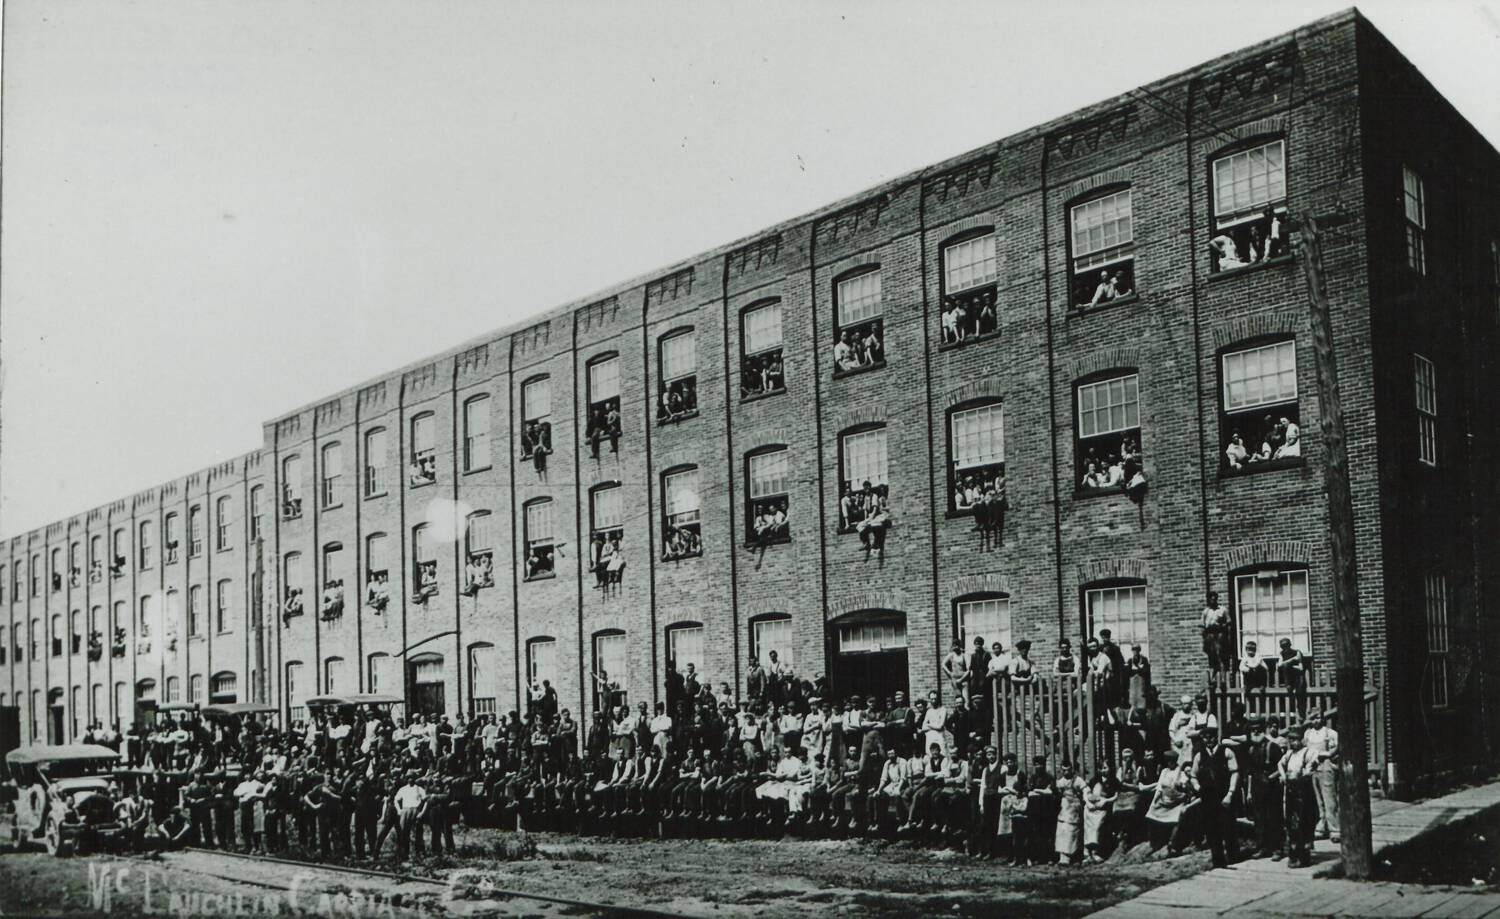 McLaughlin Carriage Co. and Motorcar Co. employees at the Richmond and Mary Street plant, 1908